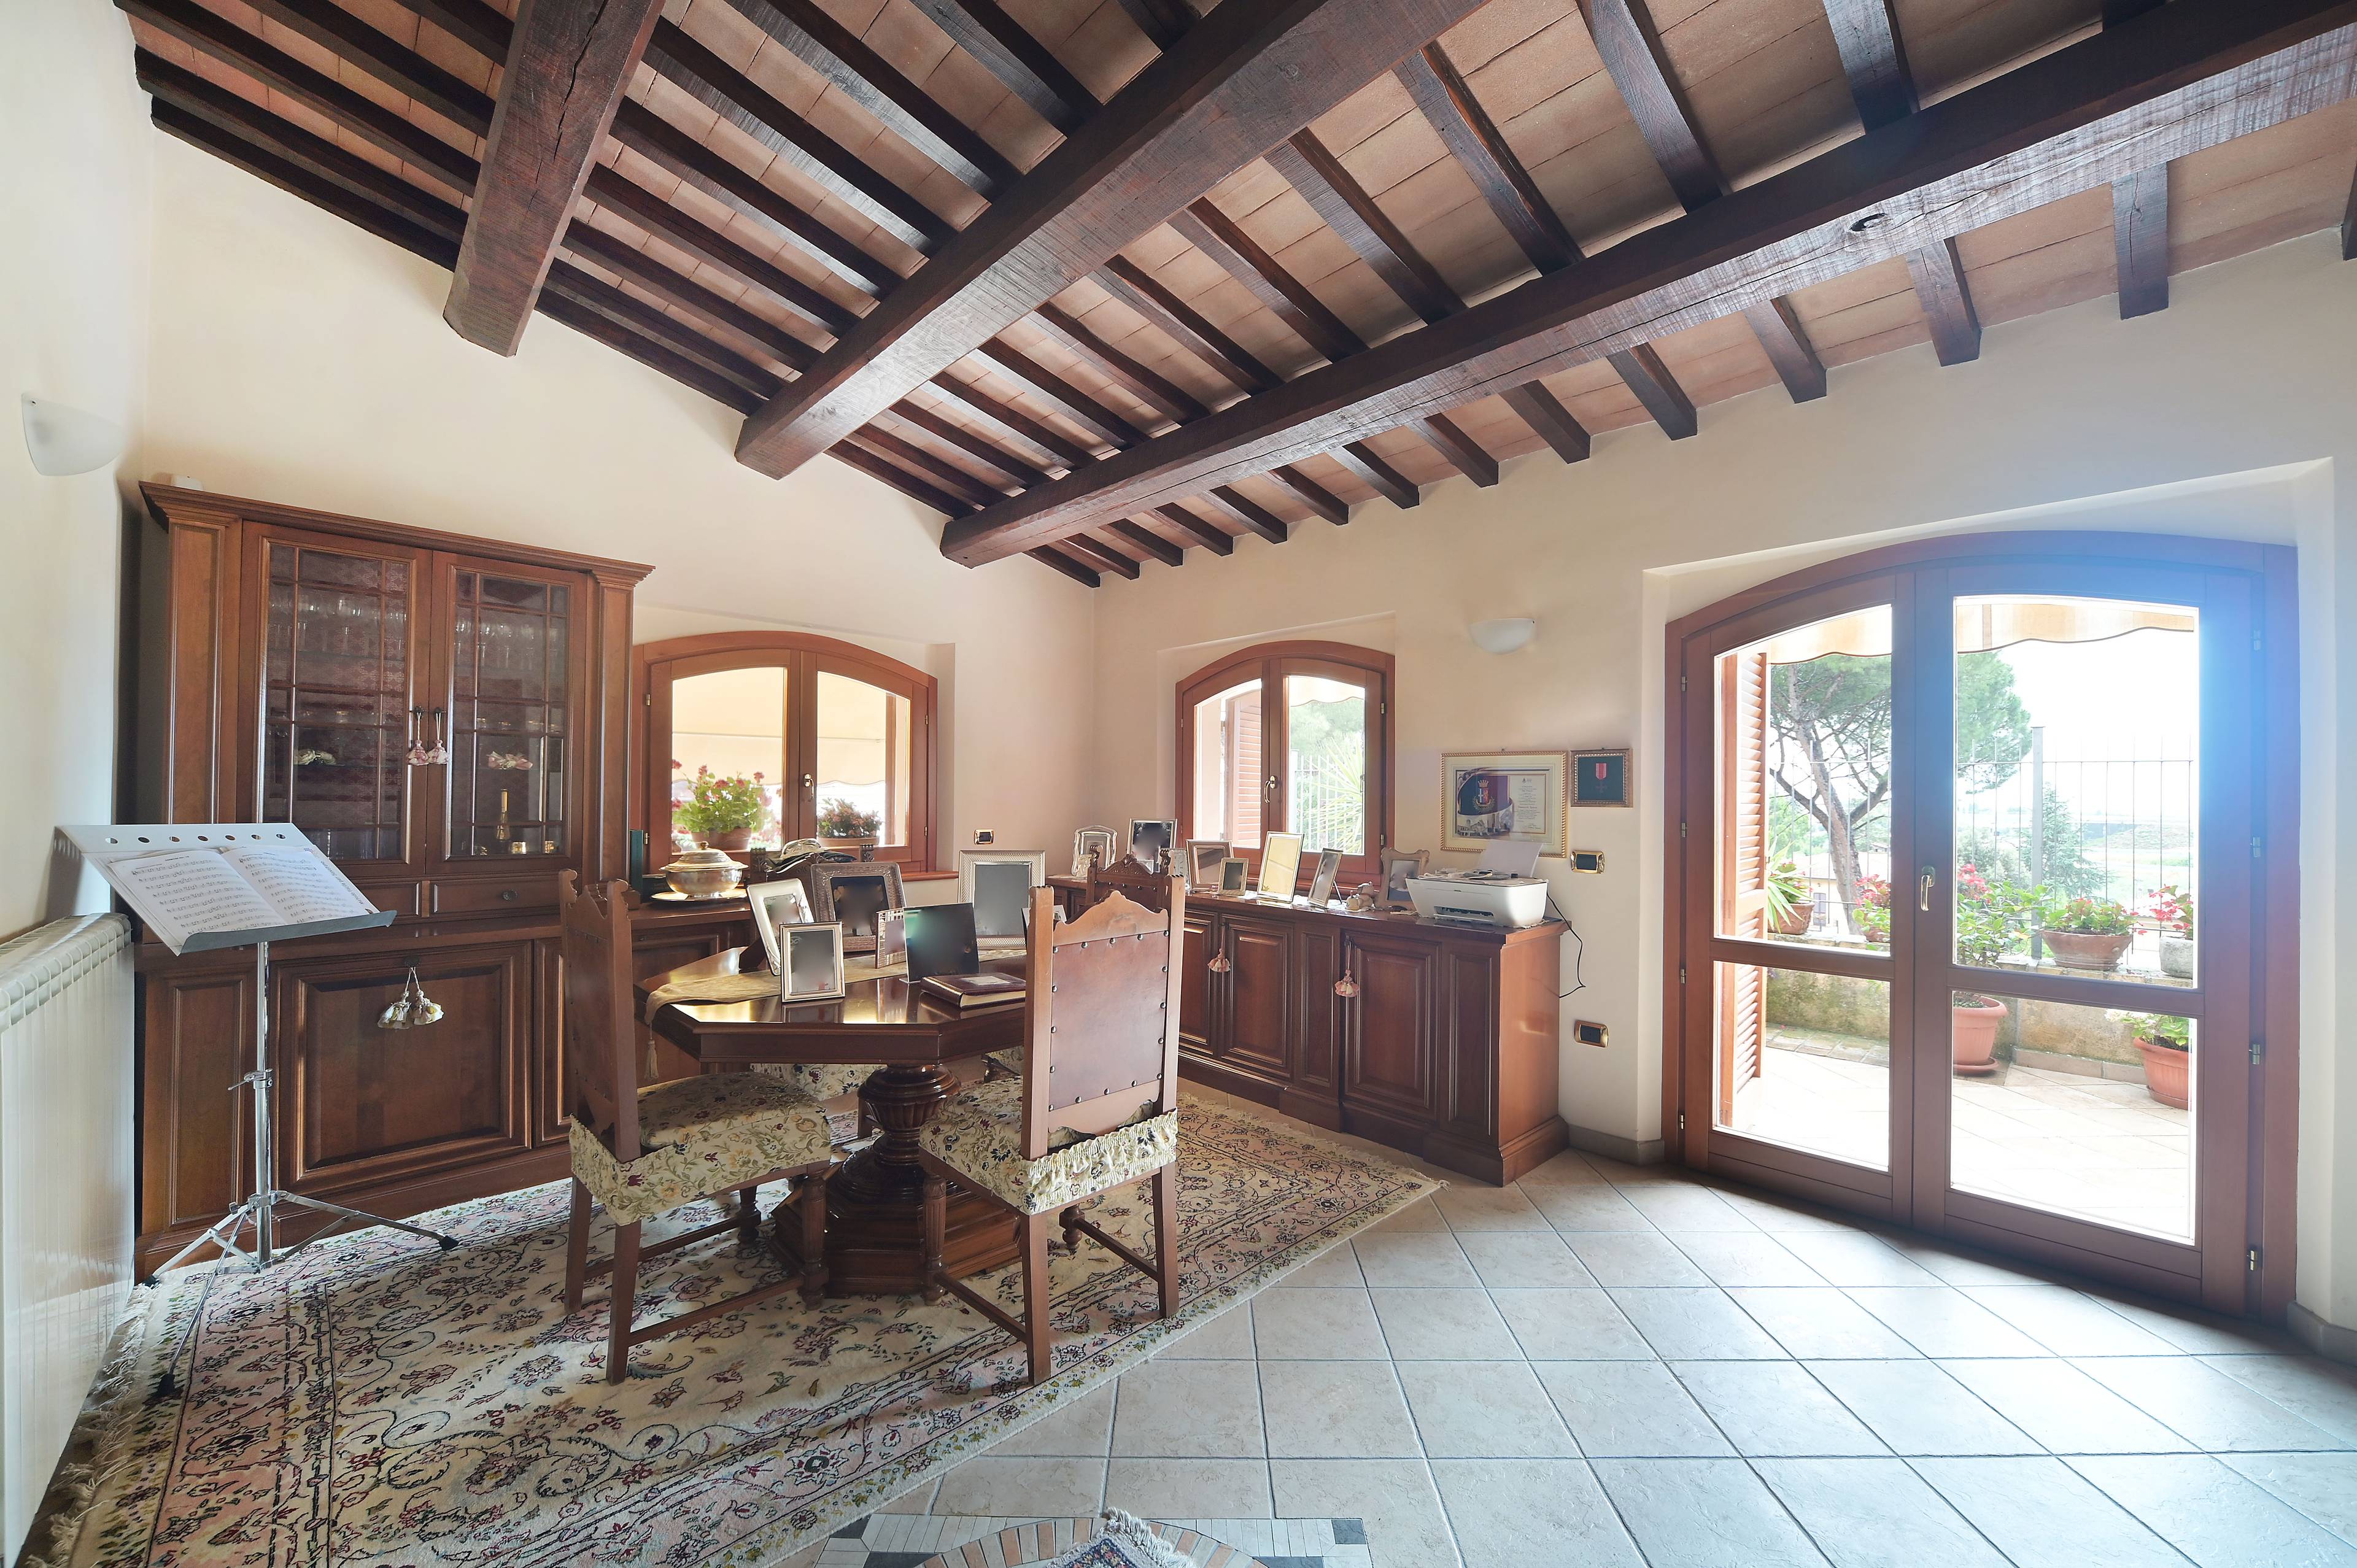 IN THE HEART OF UMBRIA BEAUTIFUL DETACHED HOUSE IN SPELLO.